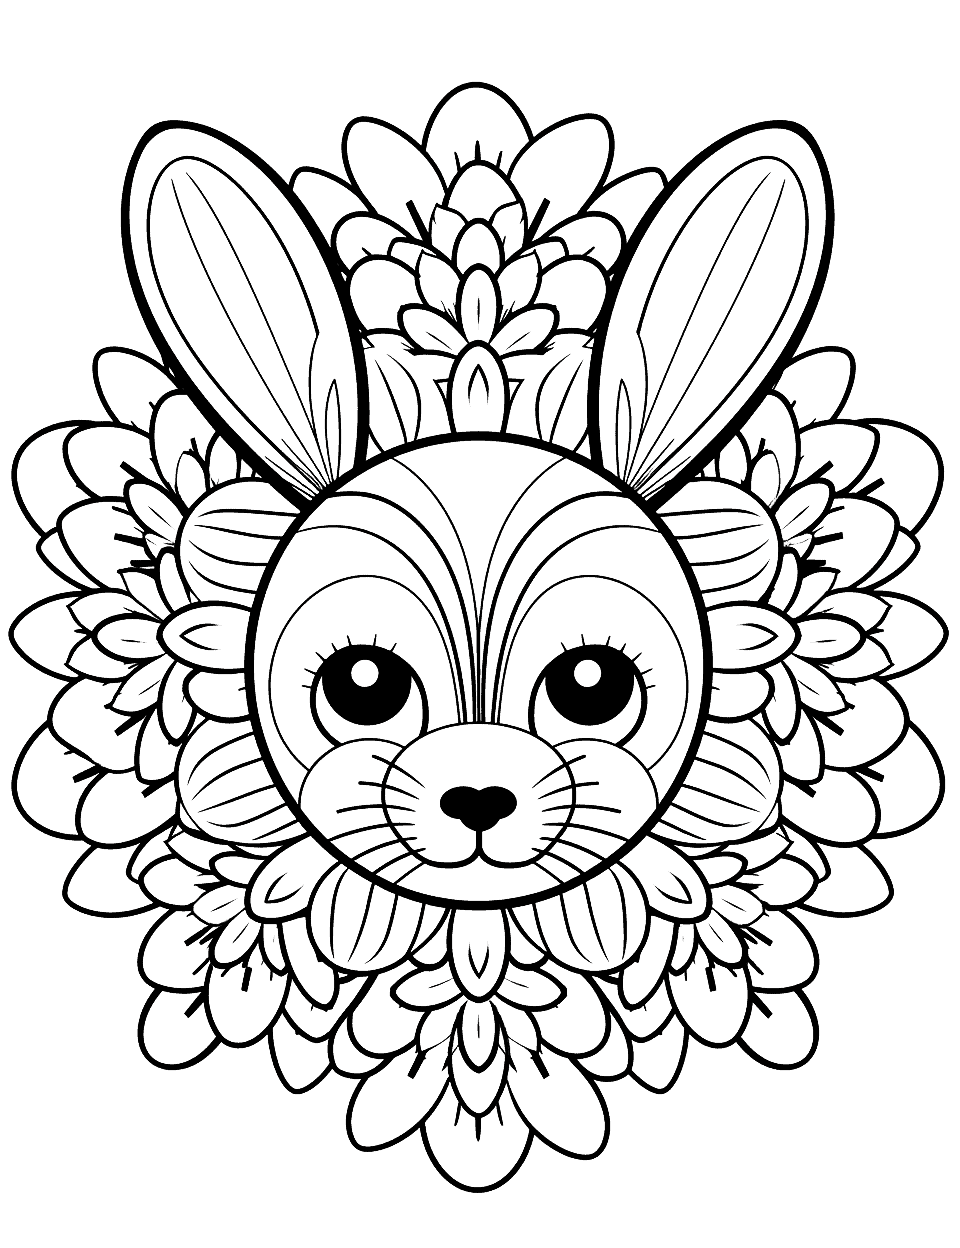 Fluffy Bunny Mandala Coloring Page - A cute mandala perfect for Easter, featuring bunnies, eggs, and spring flowers.